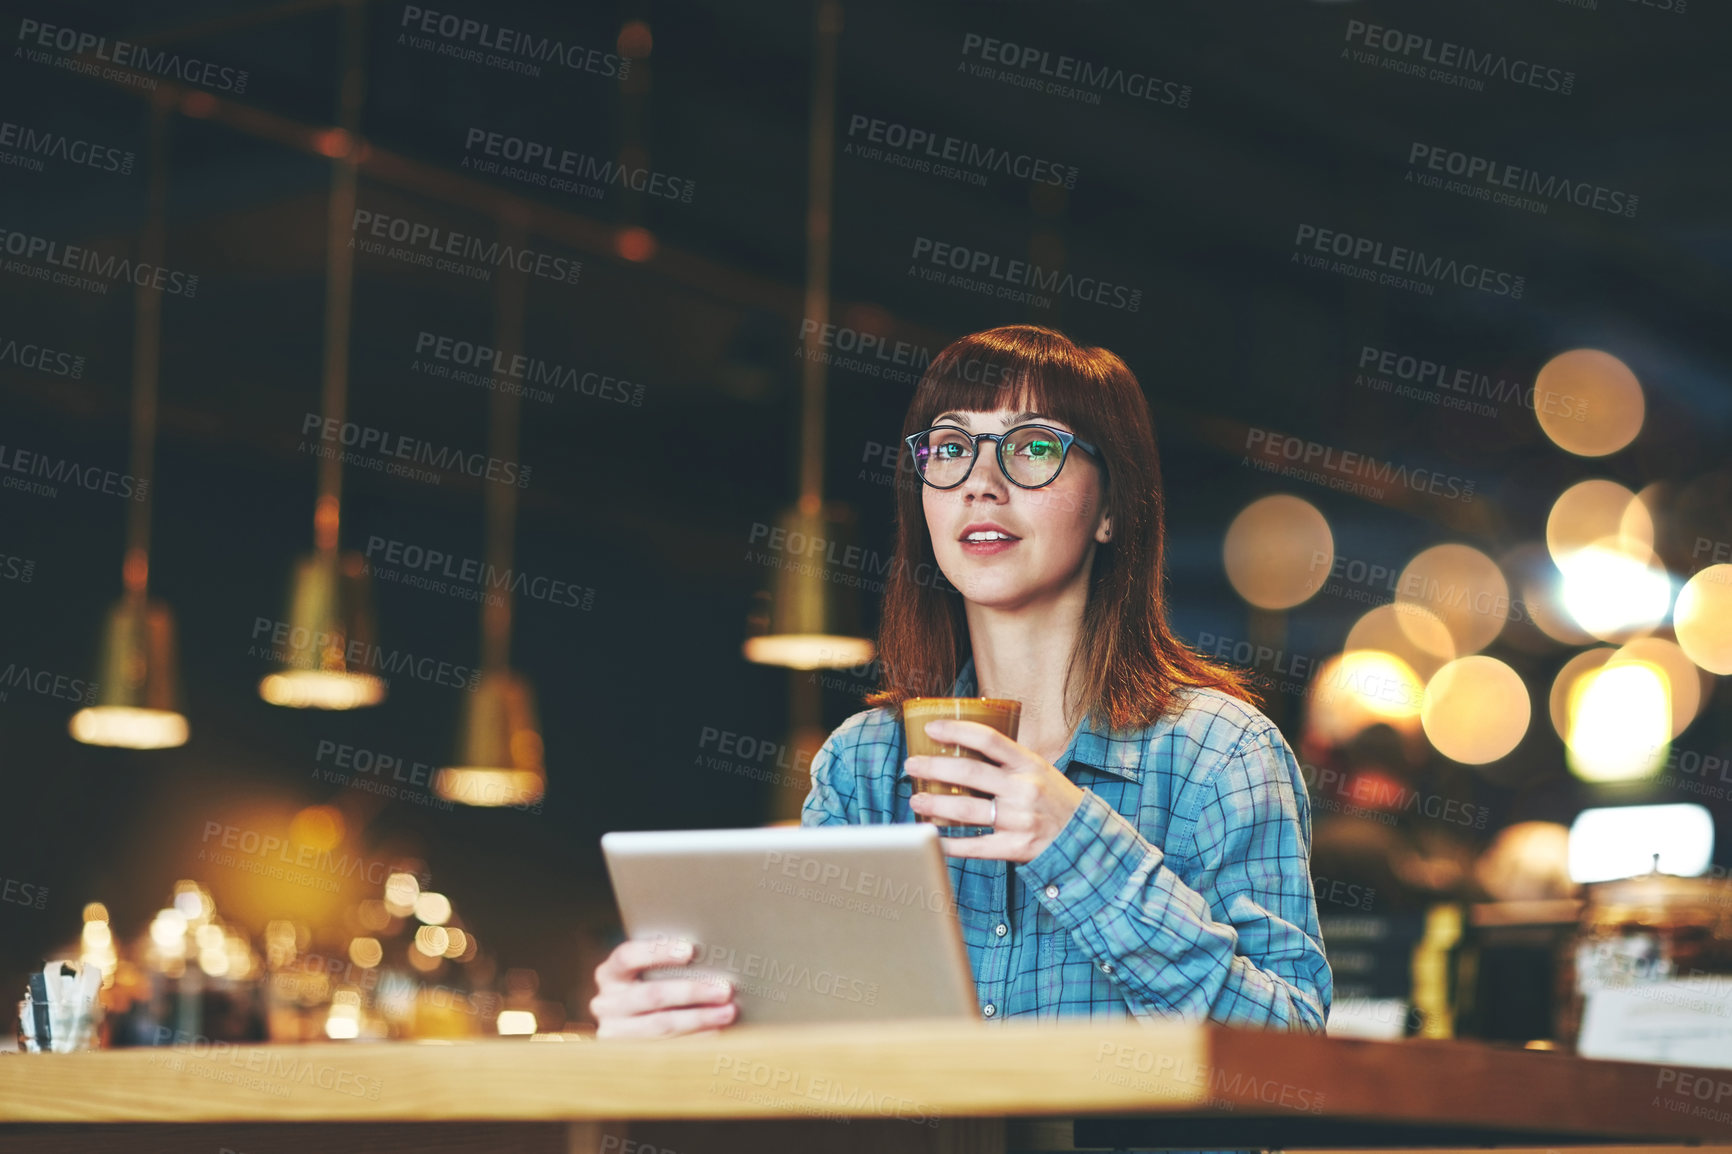 Buy stock photo Shot of an attractive young woman looking thoughtful while using a digital tablet in a cafe